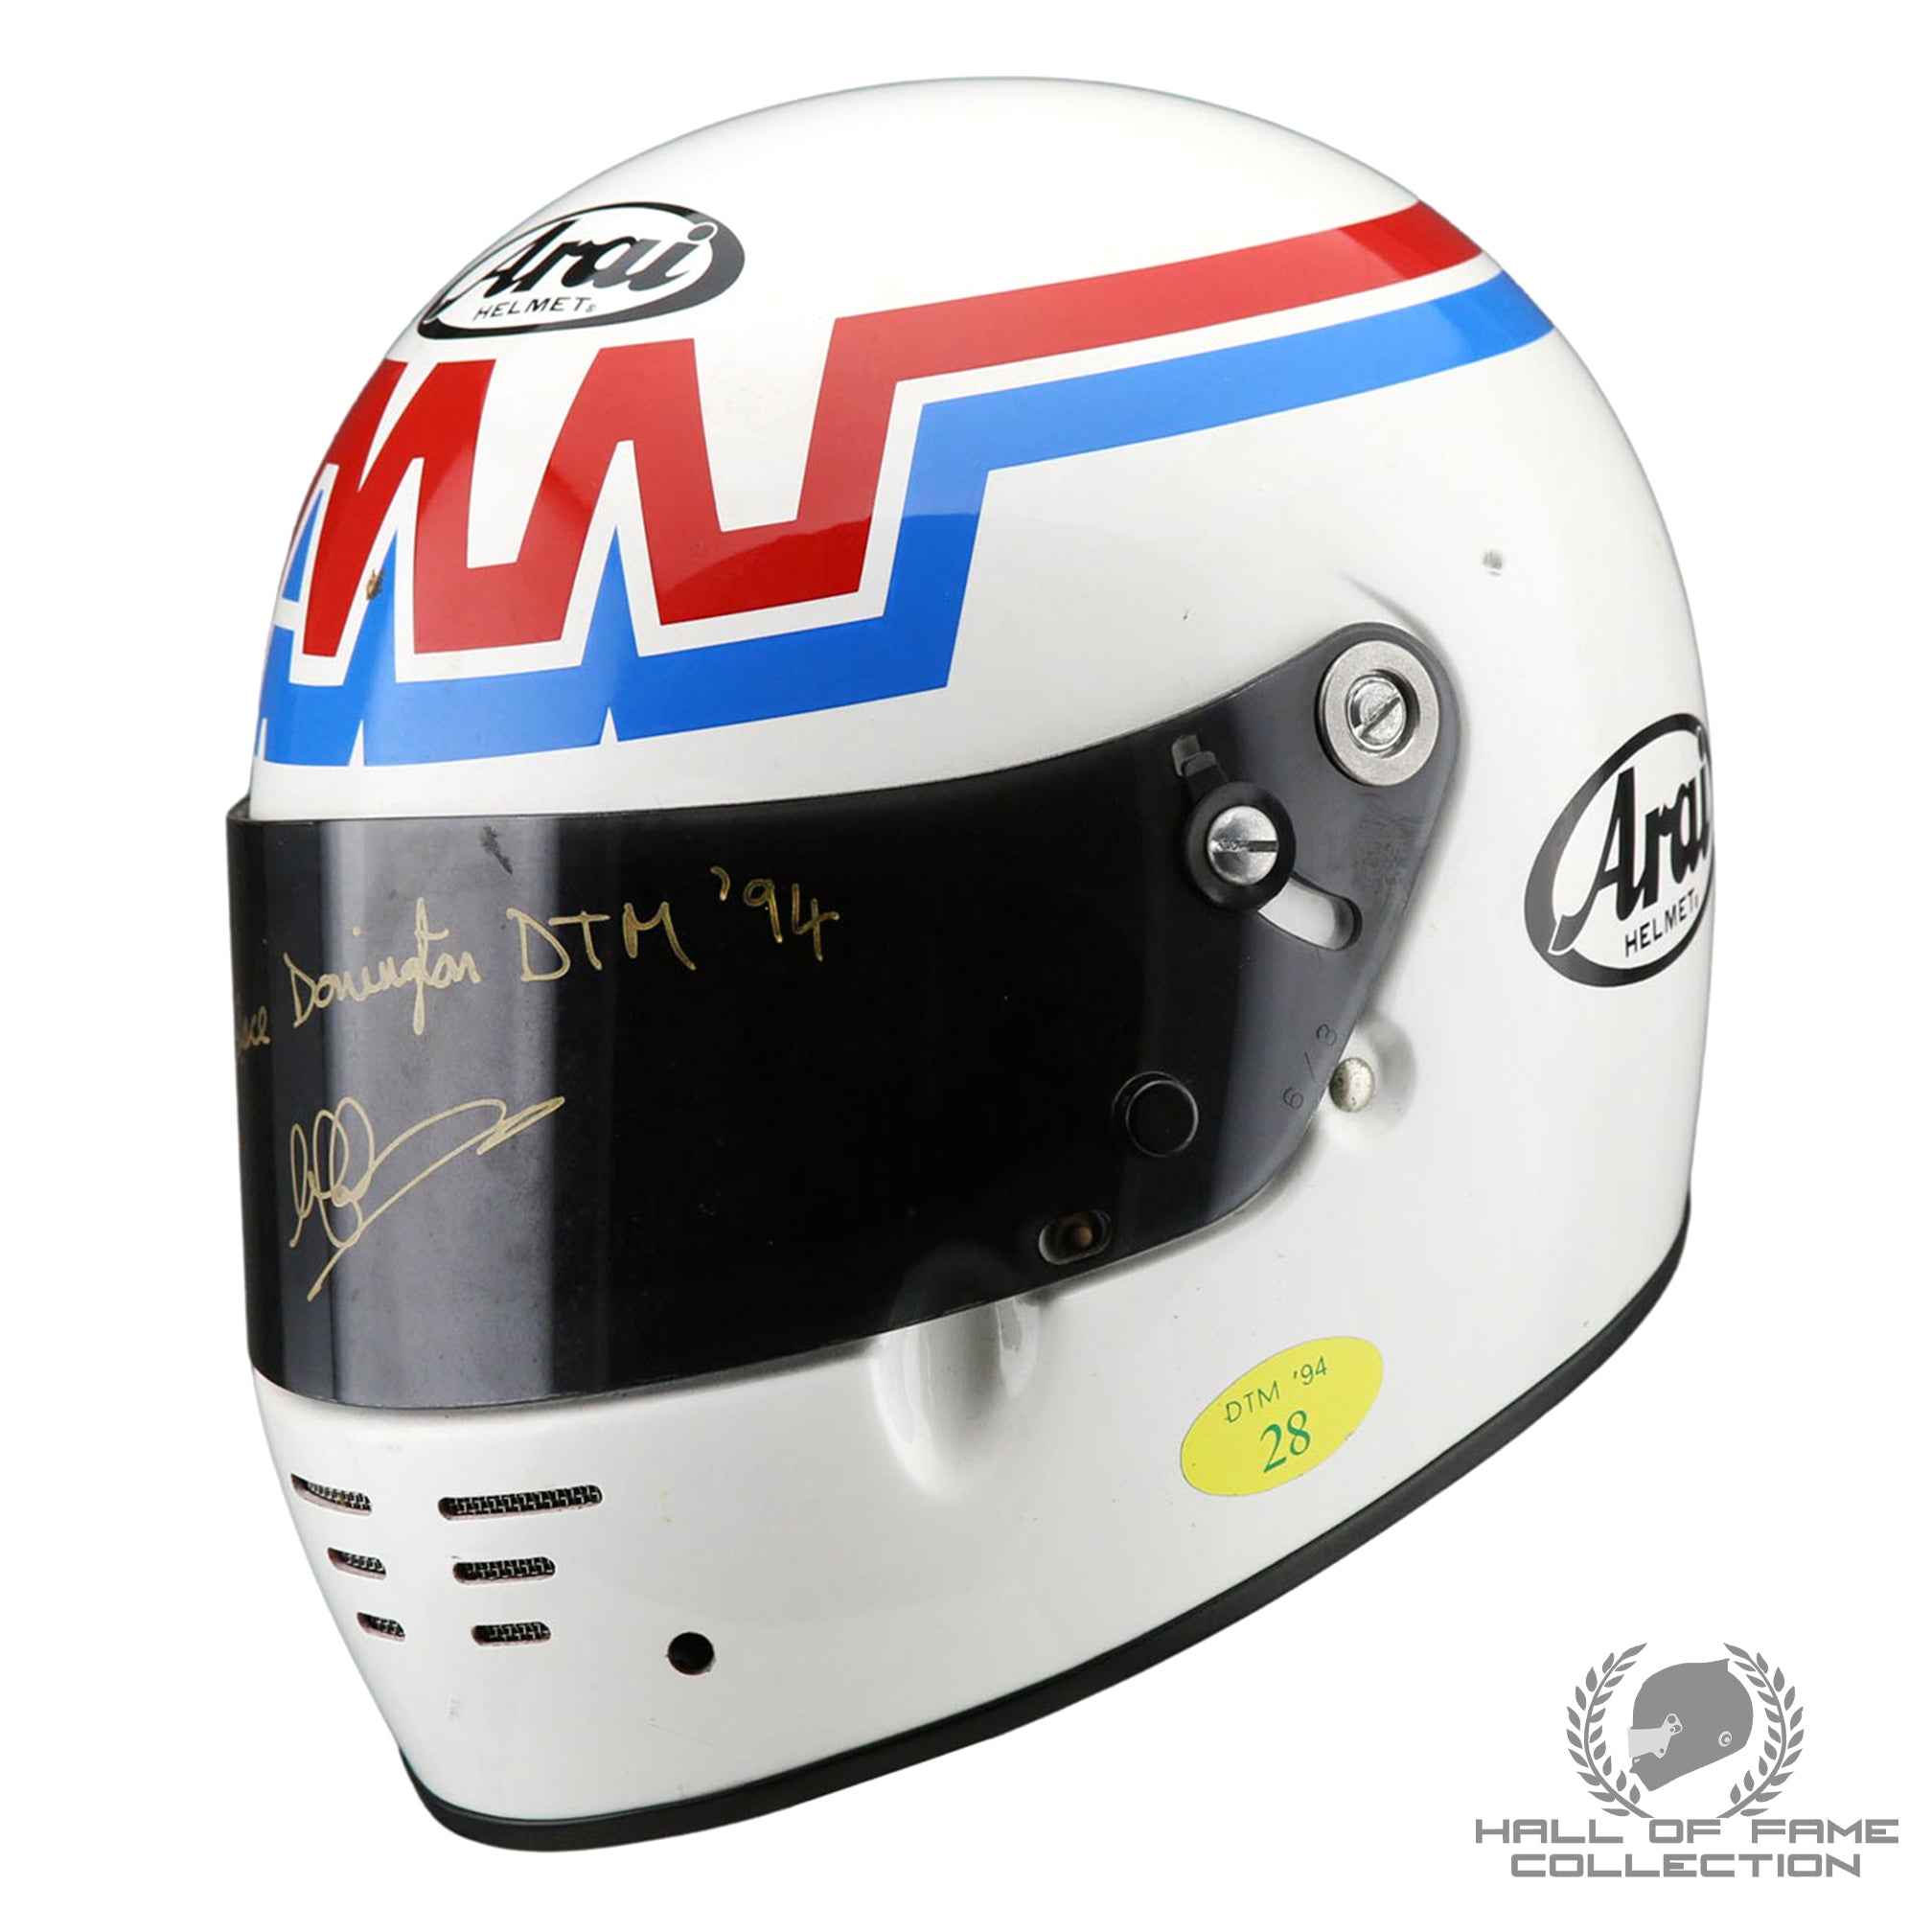 1994 Andy Wallace Signed Donington Park Race Used Schubel Engineering DTM Helmet